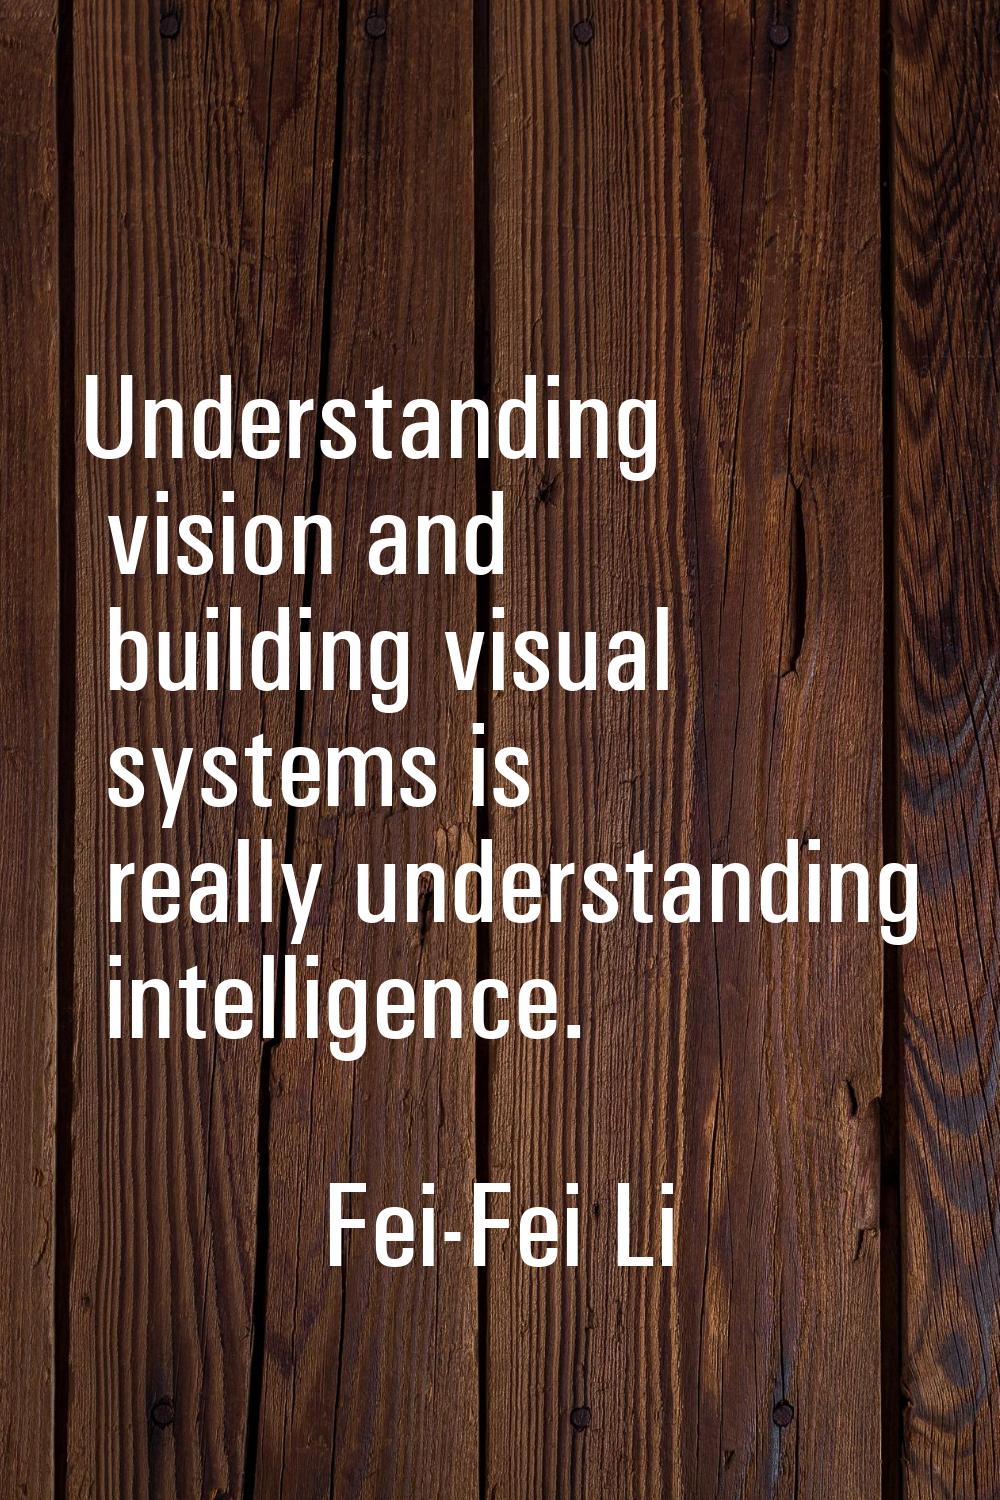 Understanding vision and building visual systems is really understanding intelligence.